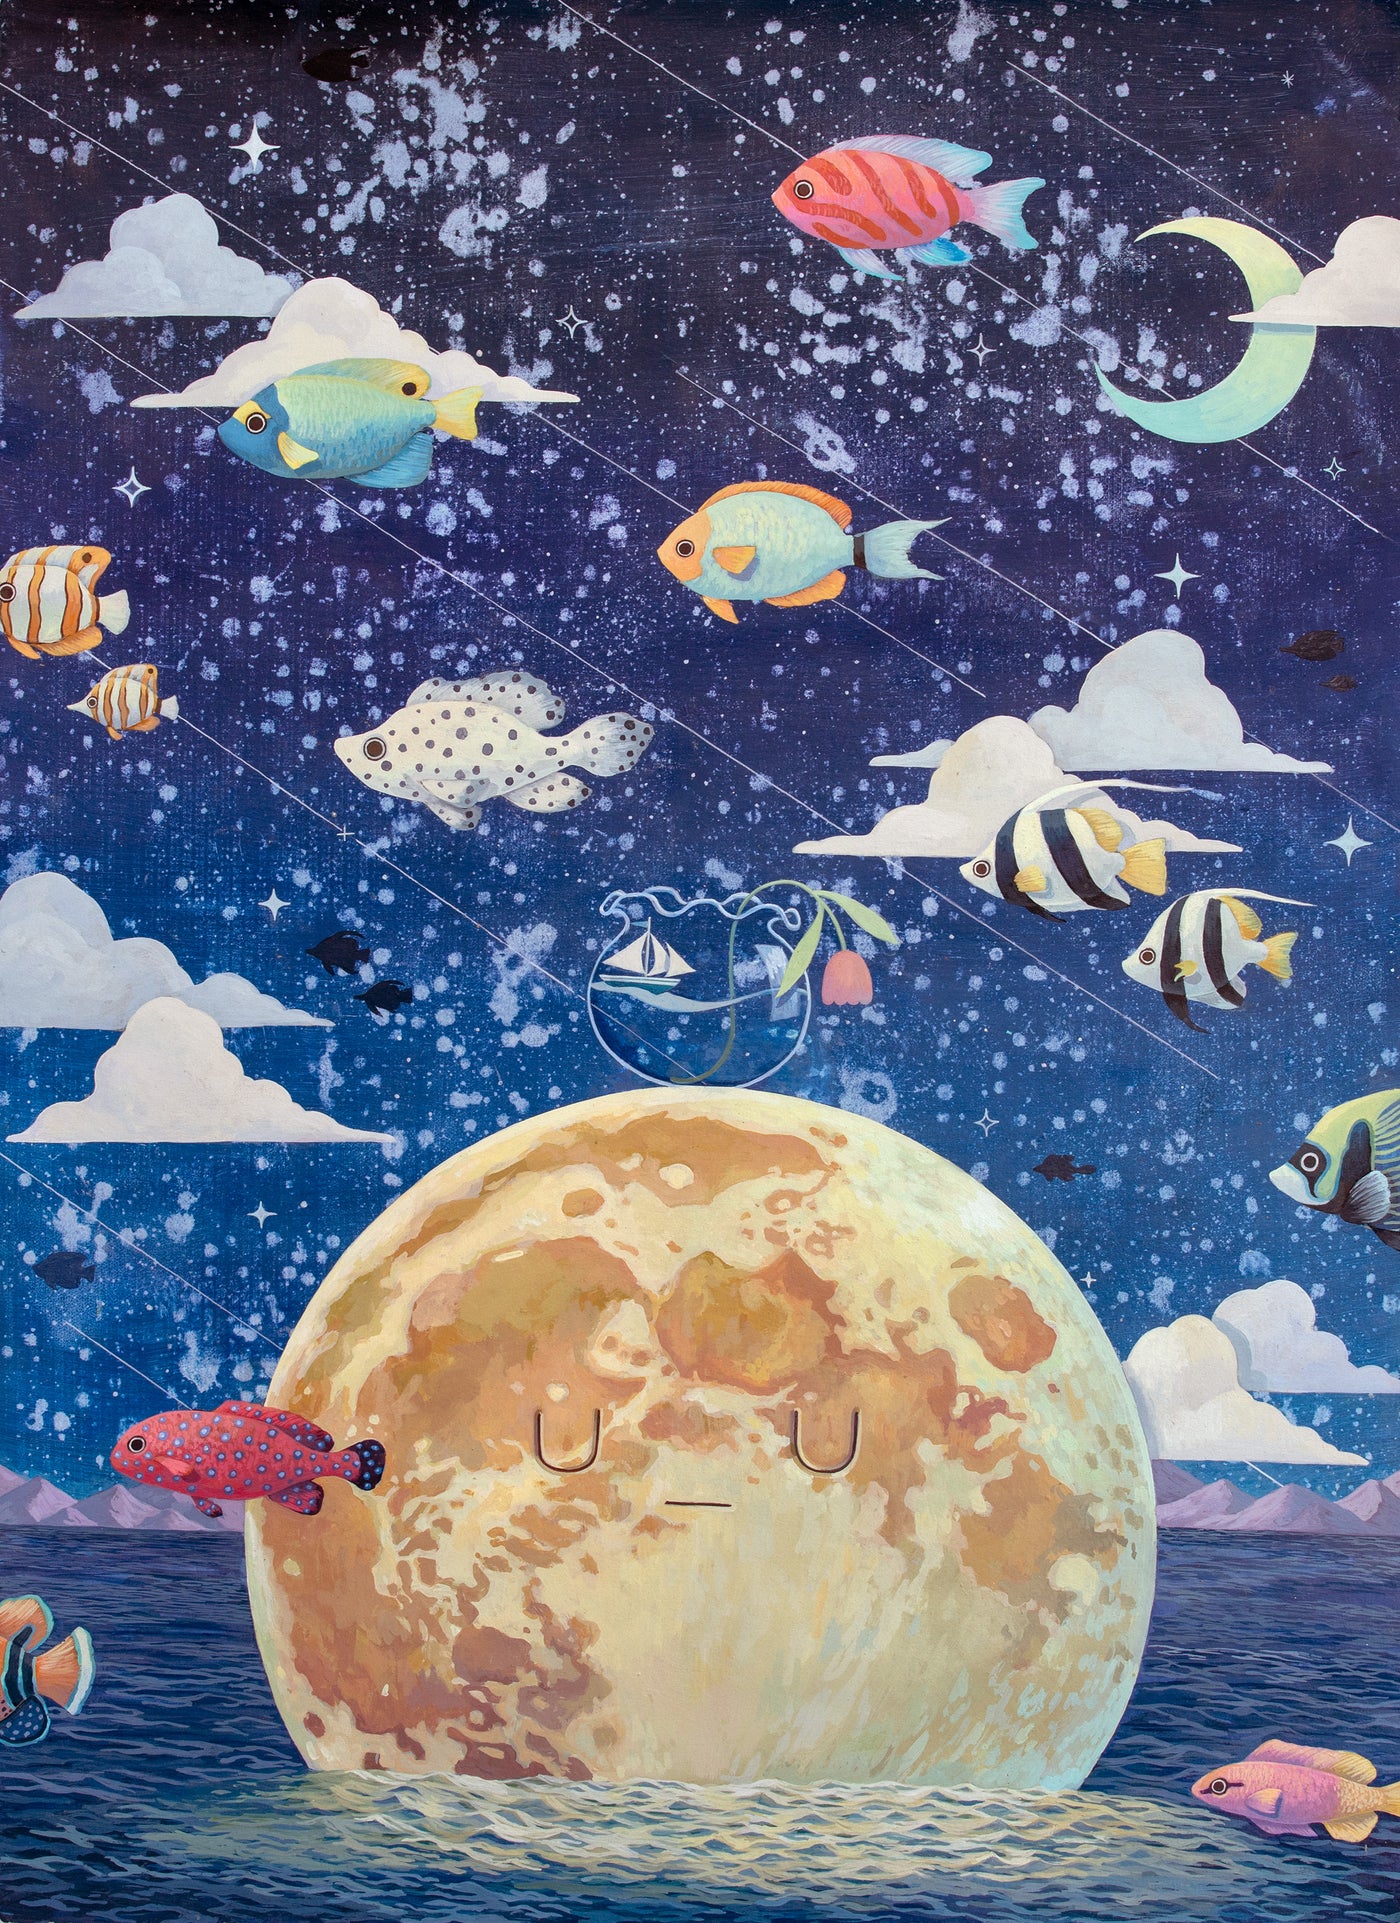 Painting of a large orange planet, partially submerged in water with many fish swimming overhead against a blue starry sky.